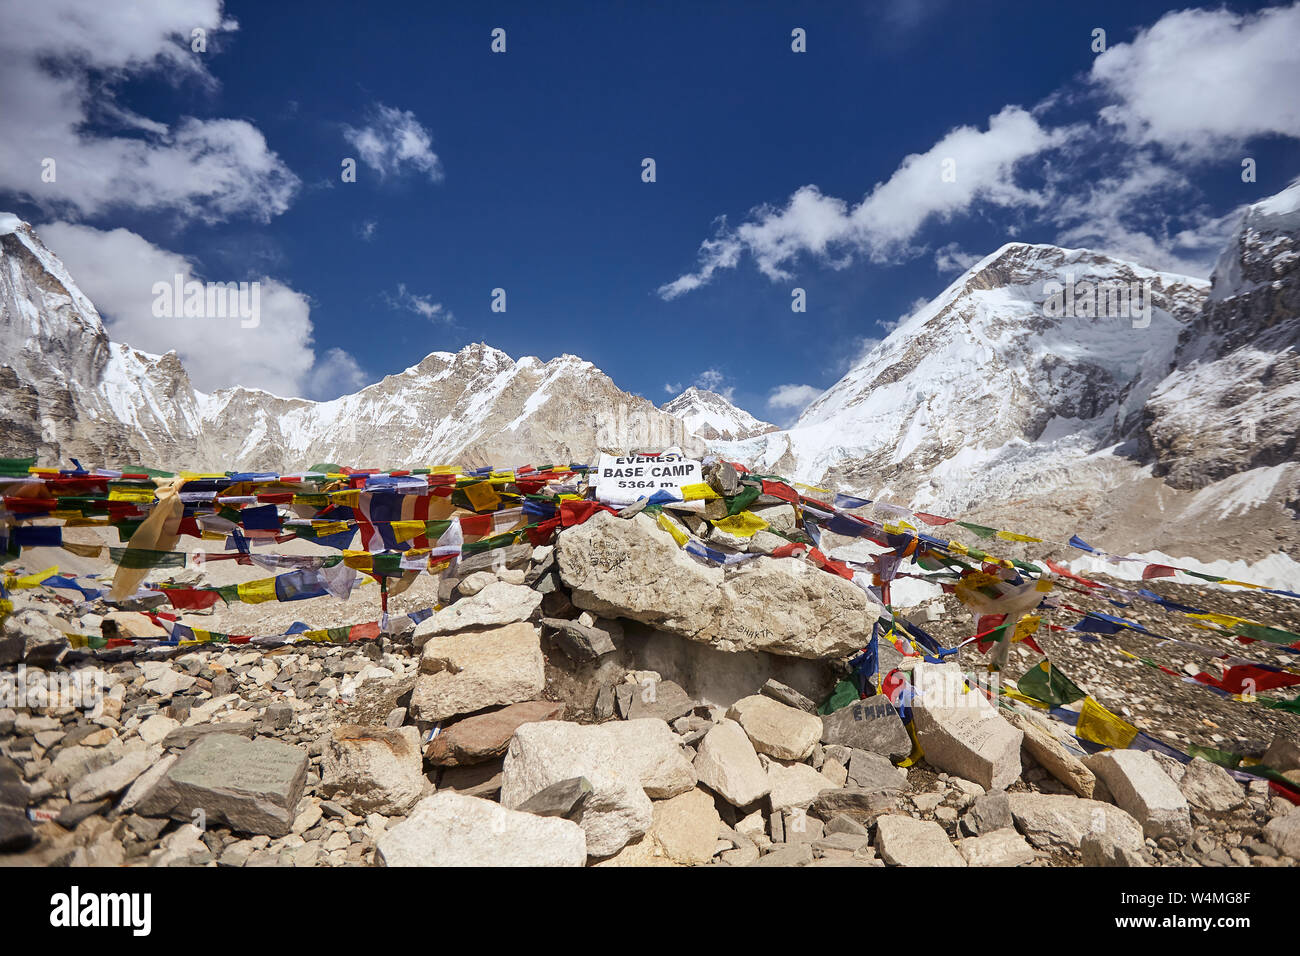 View from Mount Everest base camp with rows of buddhist prayer flags, Nepal, Himalayas mountains Stock Photo